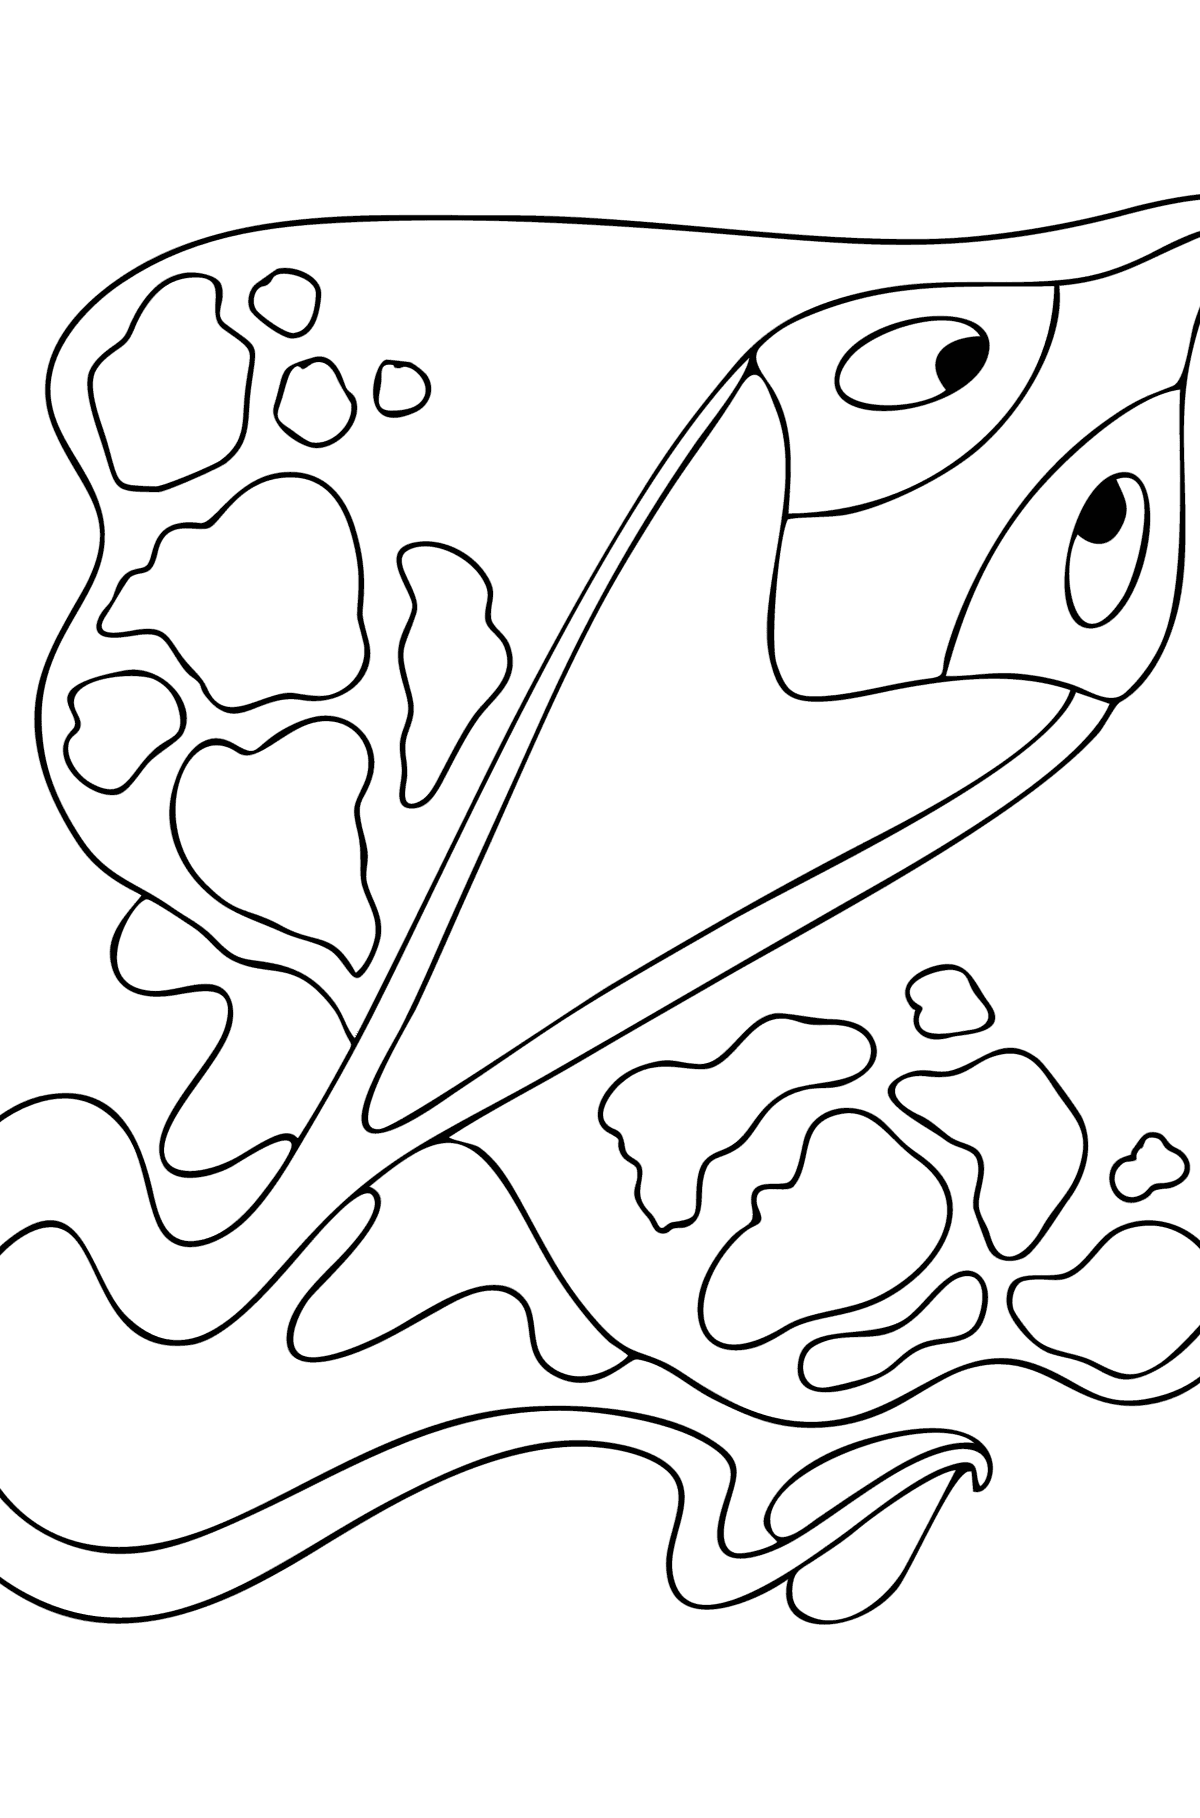 Electric Stingray coloring page - Coloring Pages for Kids